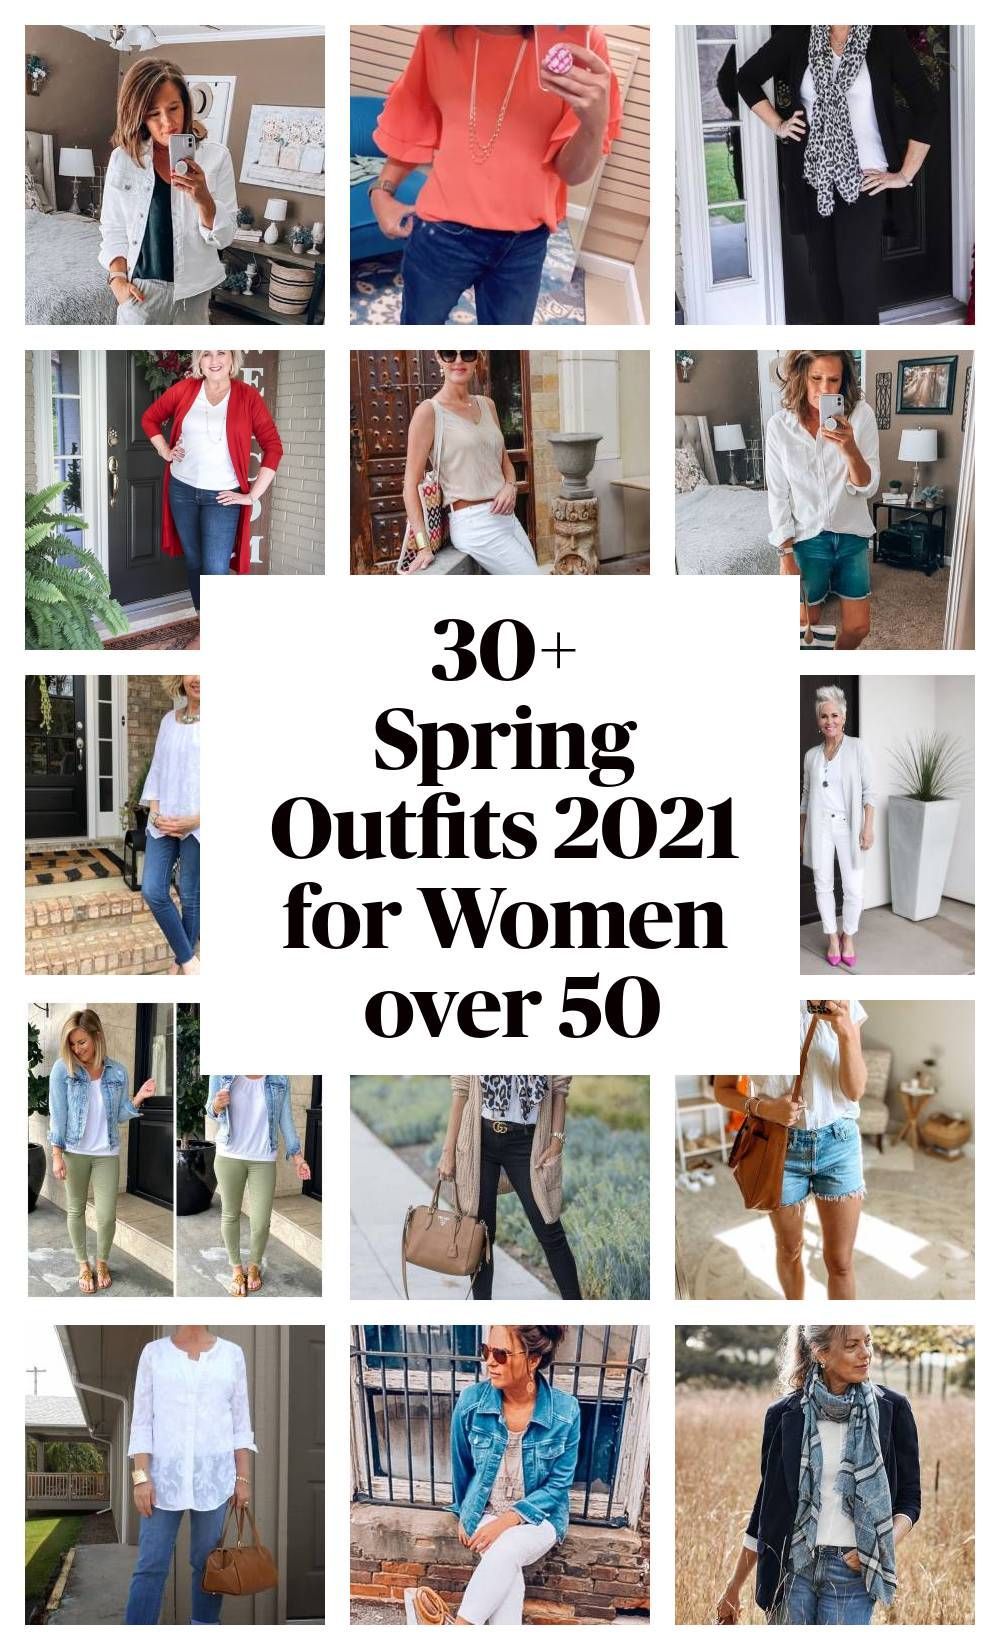 spring outfits 2021 women over 50